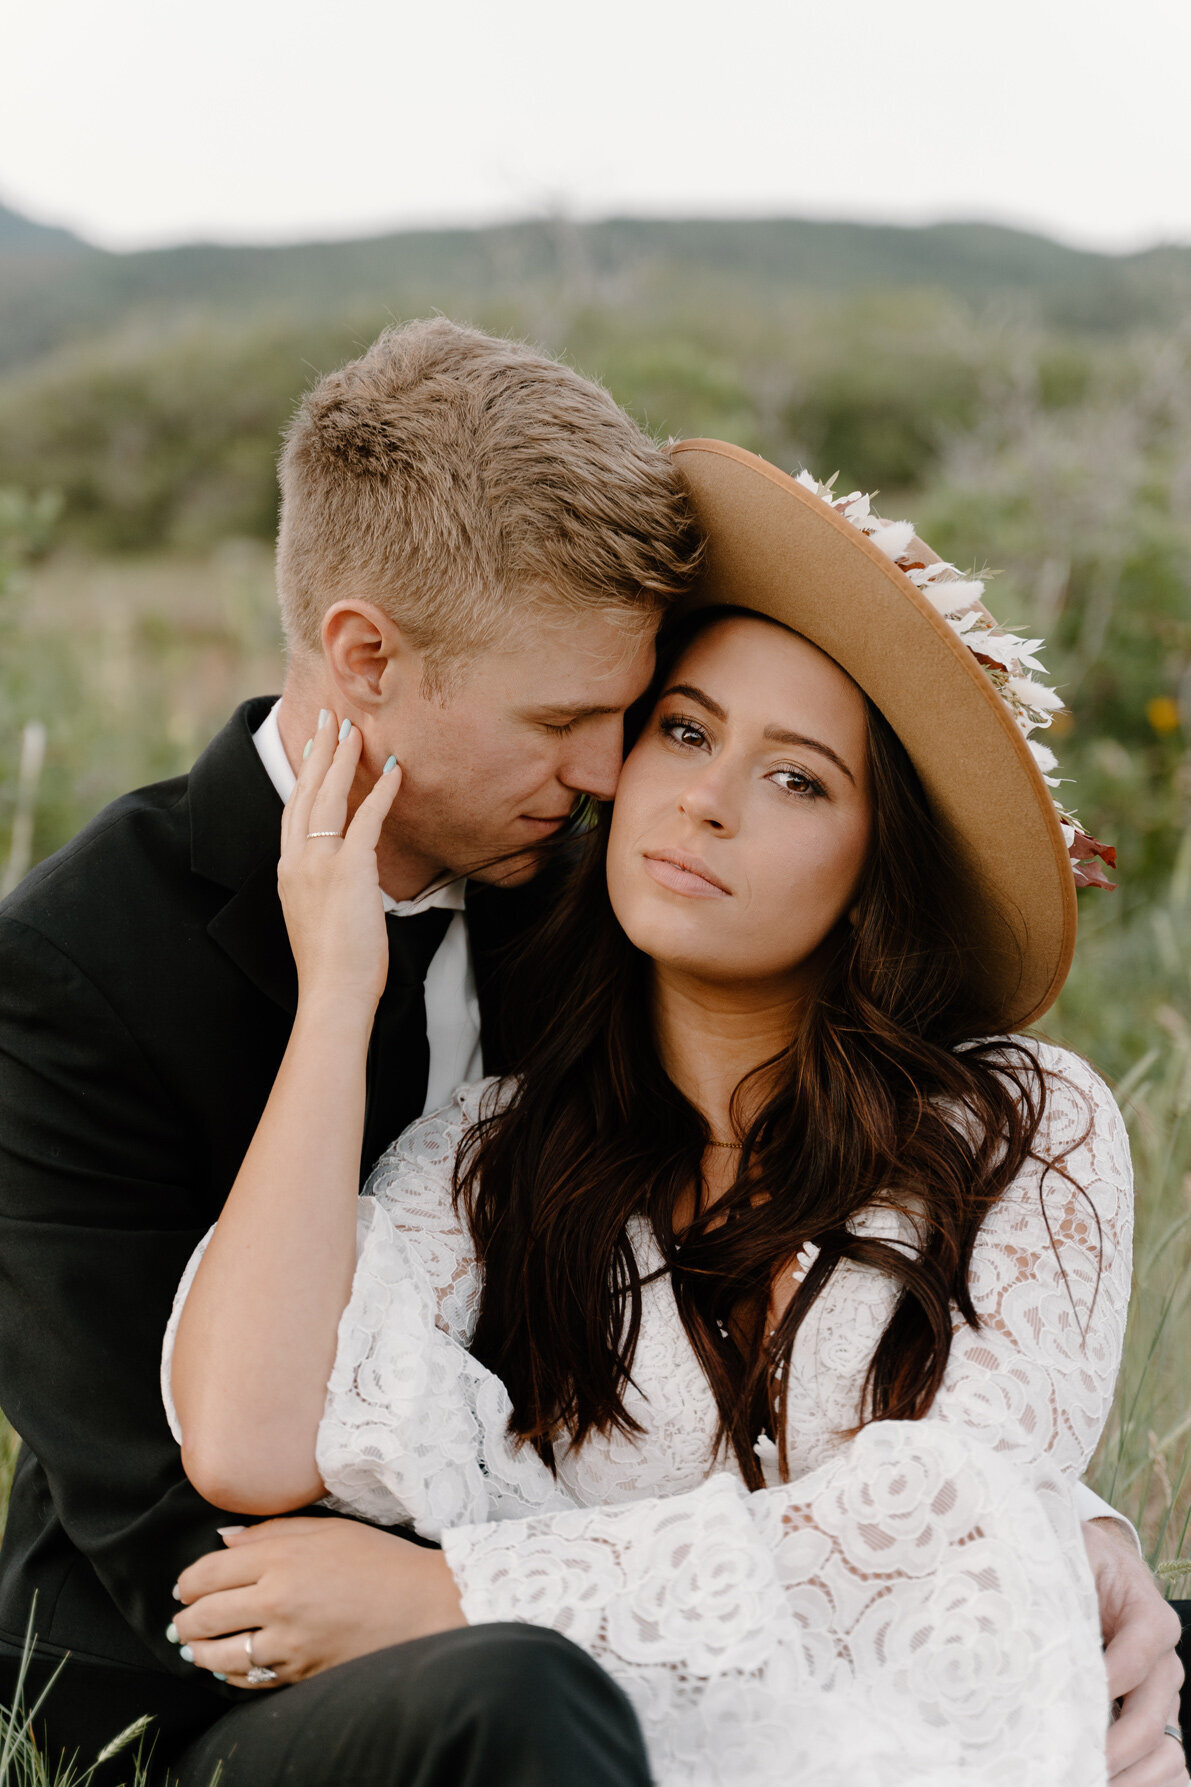 Wedding photo from a sunrise elopement in Provo, Utah featuring a boho wedding style